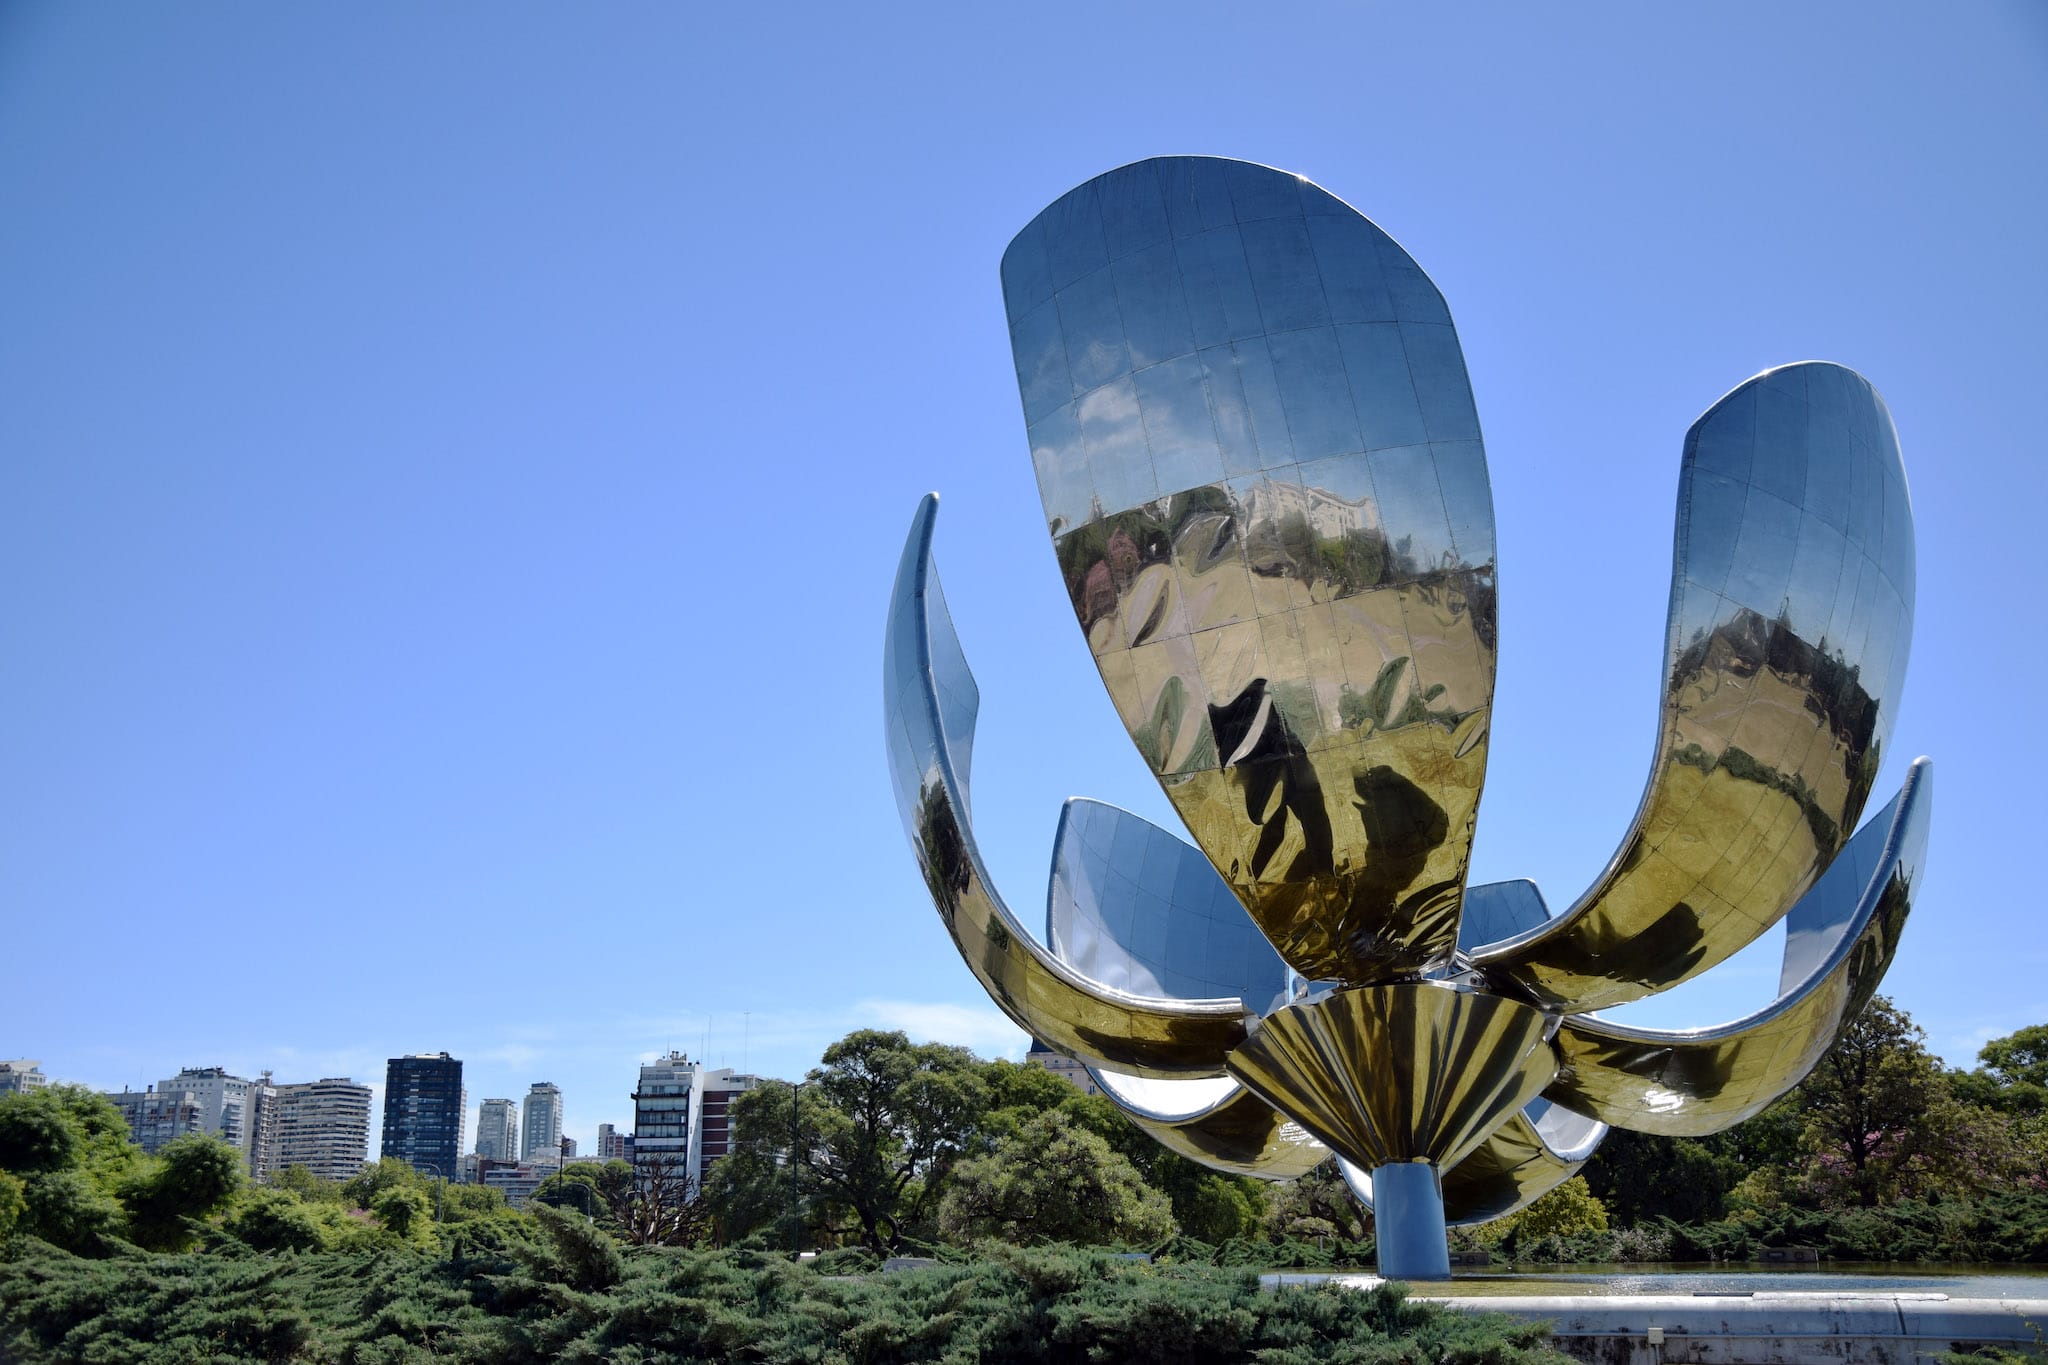 Floralis Generica Buenos Aires place to visit